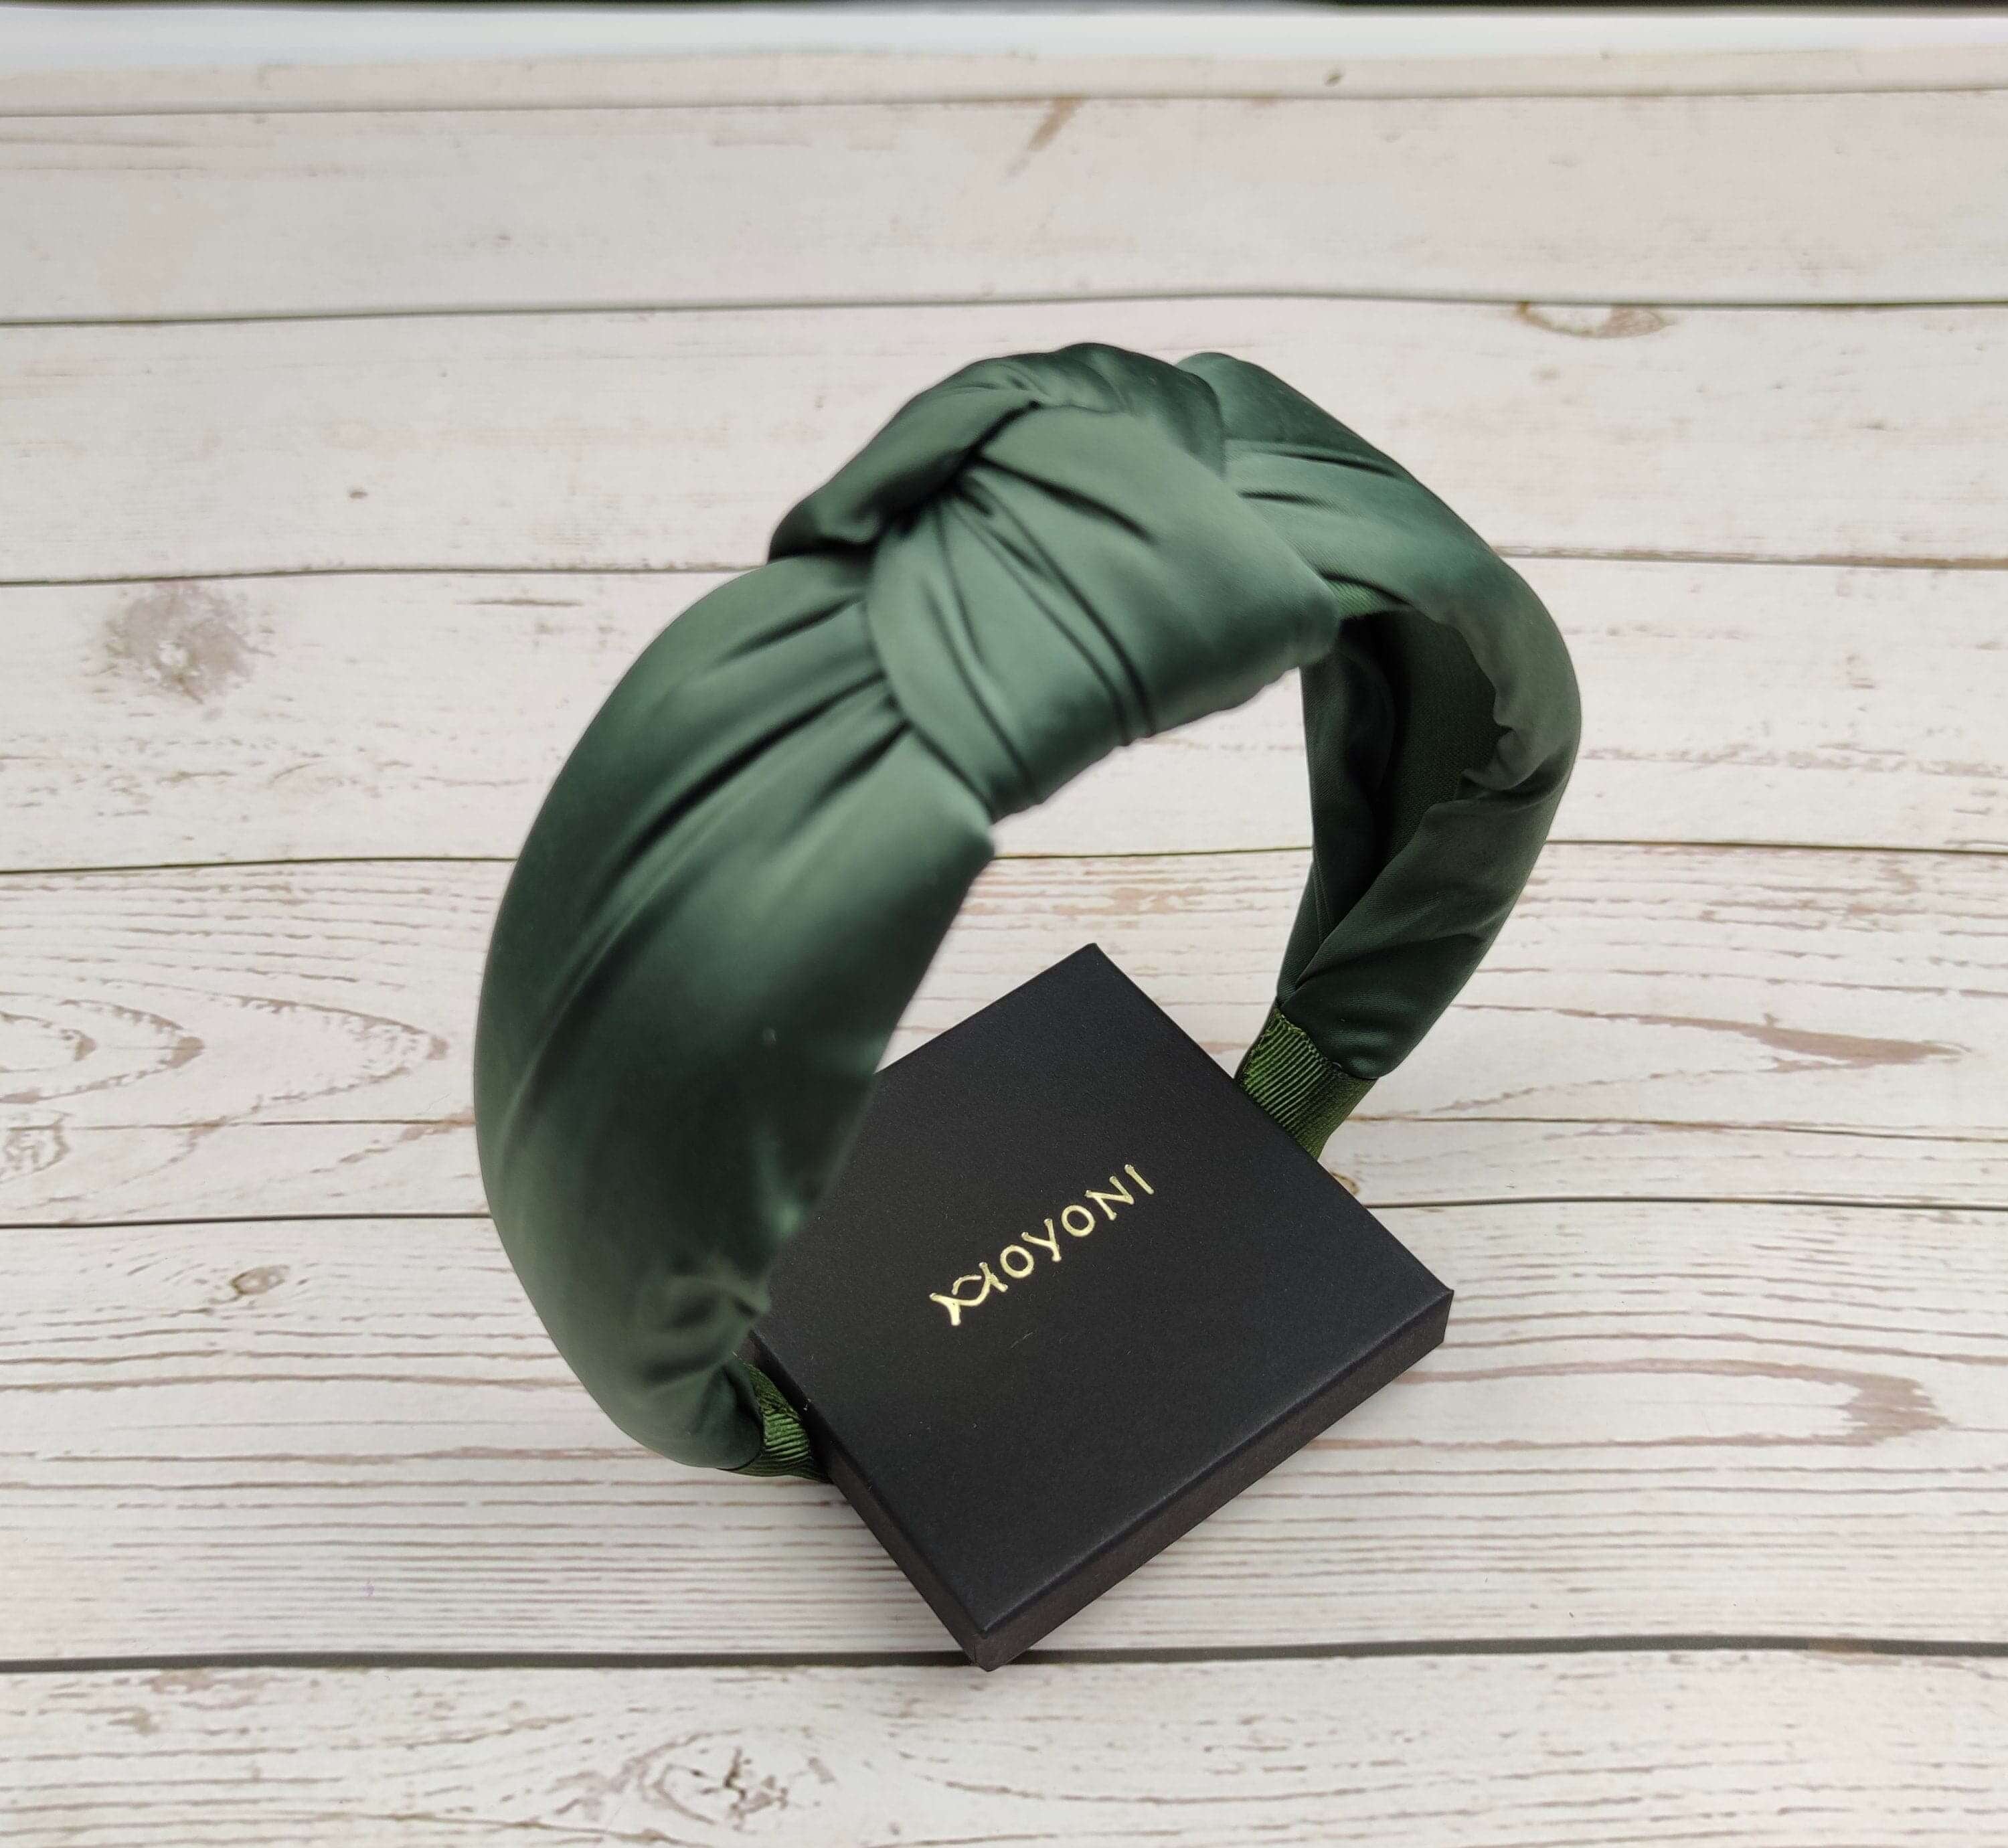 Add a touch of elegance to your outfit with this stylish Green color padded satin headband. This headband is made of soft and comfortable satin fabric and features a delicate embroidery design.